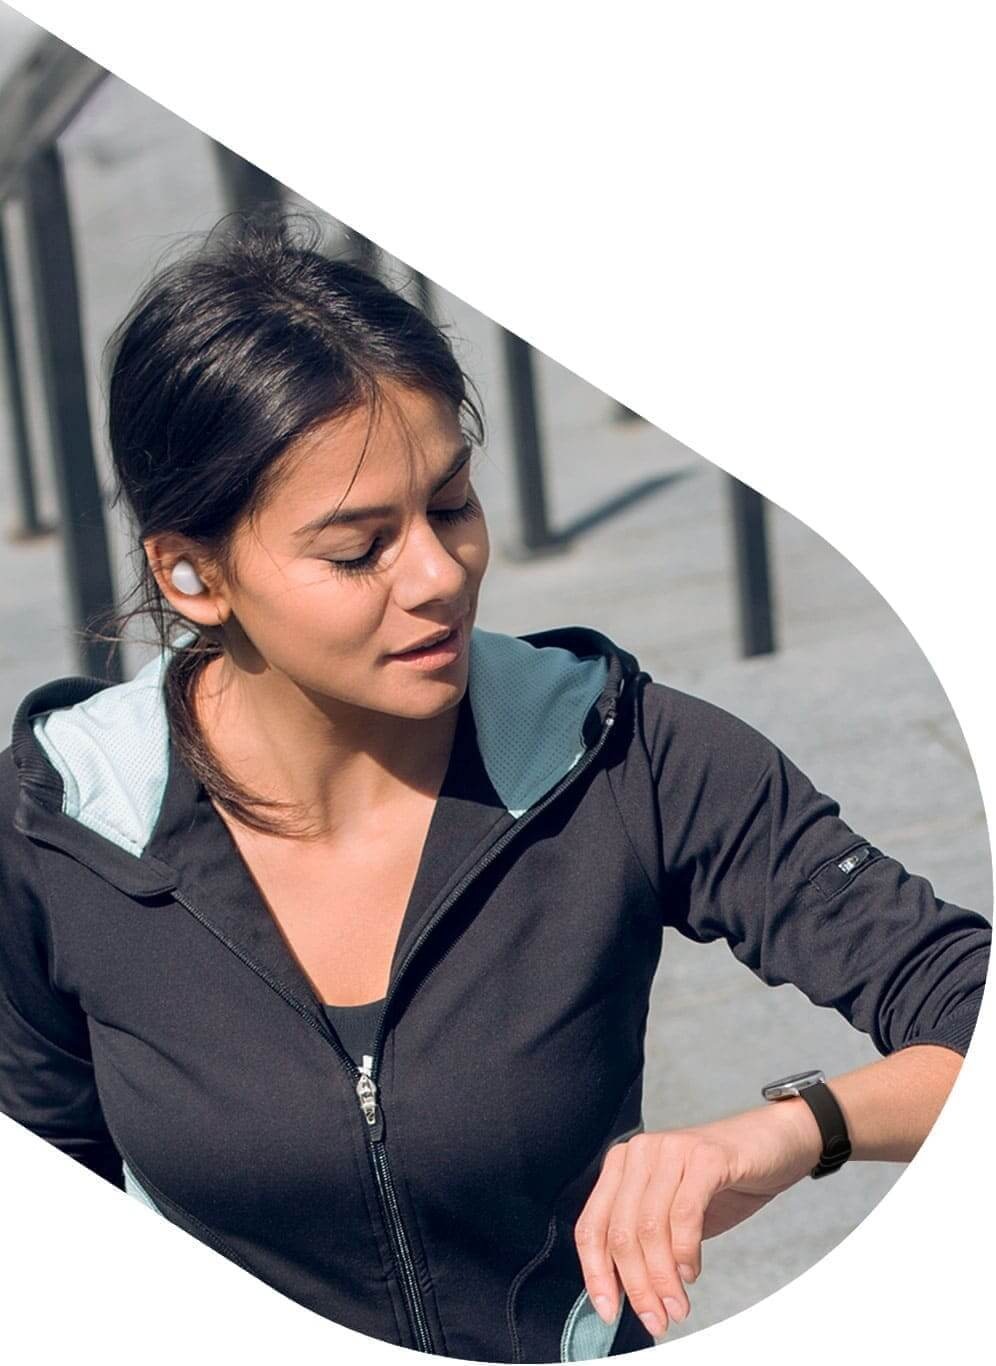 A woman out on a run takes an incoming phone call on a black Galaxy Watch active2 on her wrist, followed by another woman who uses a Galaxy Watch active2 in pink on her wrist to listen to music while engaged in outdoor activities.